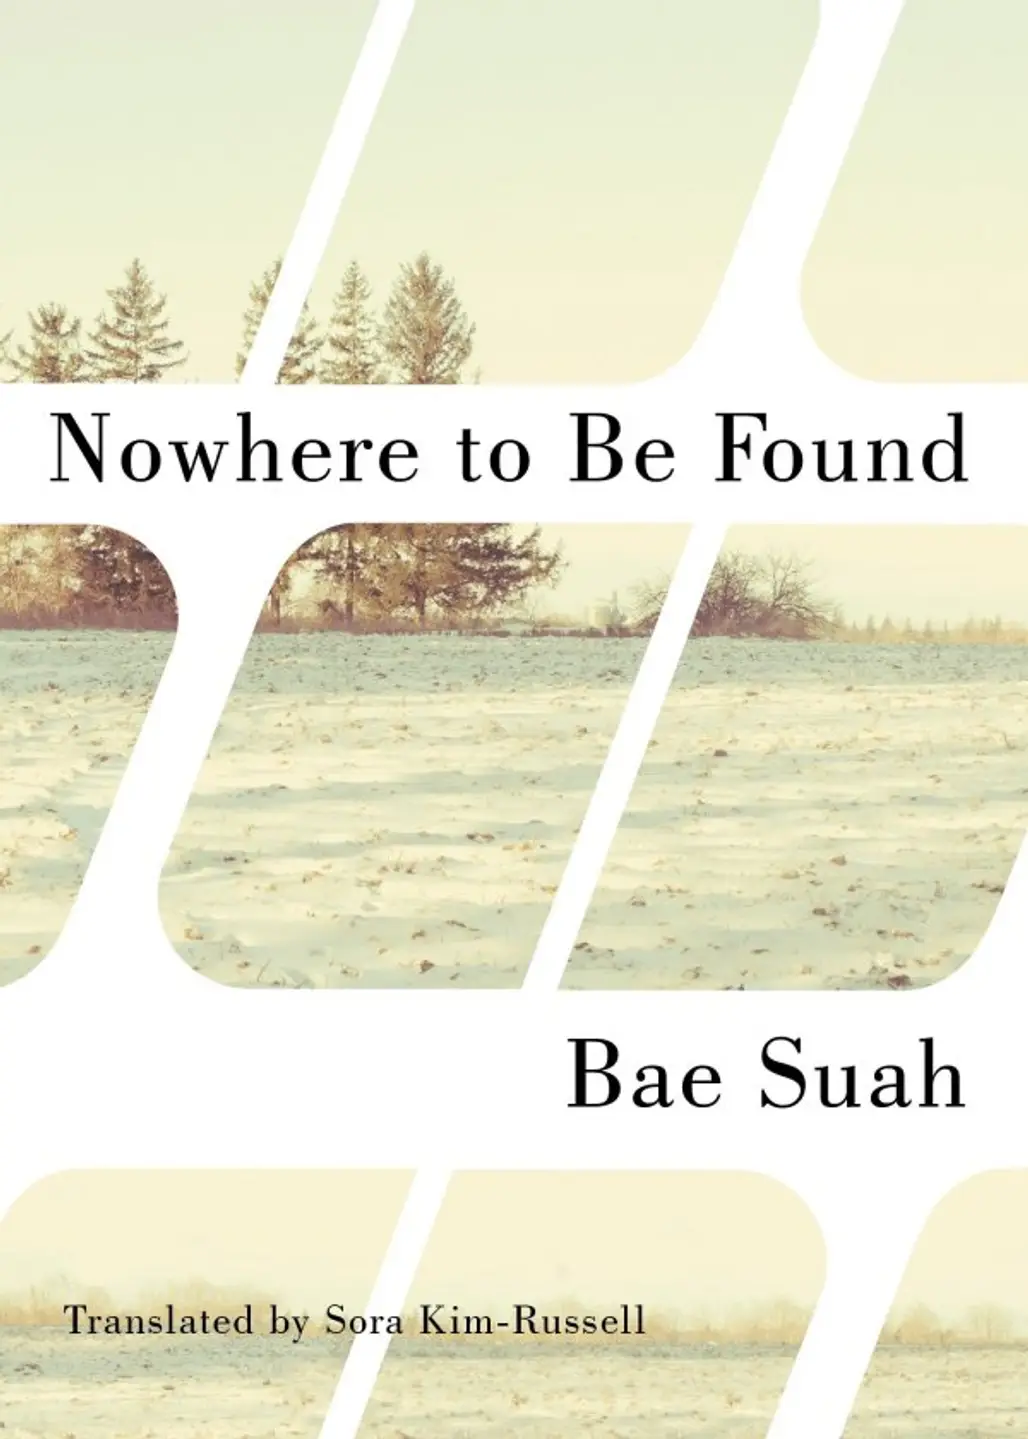 Nowhere to Be Found by Bae Suah, Translated by Sora Kim-Russell